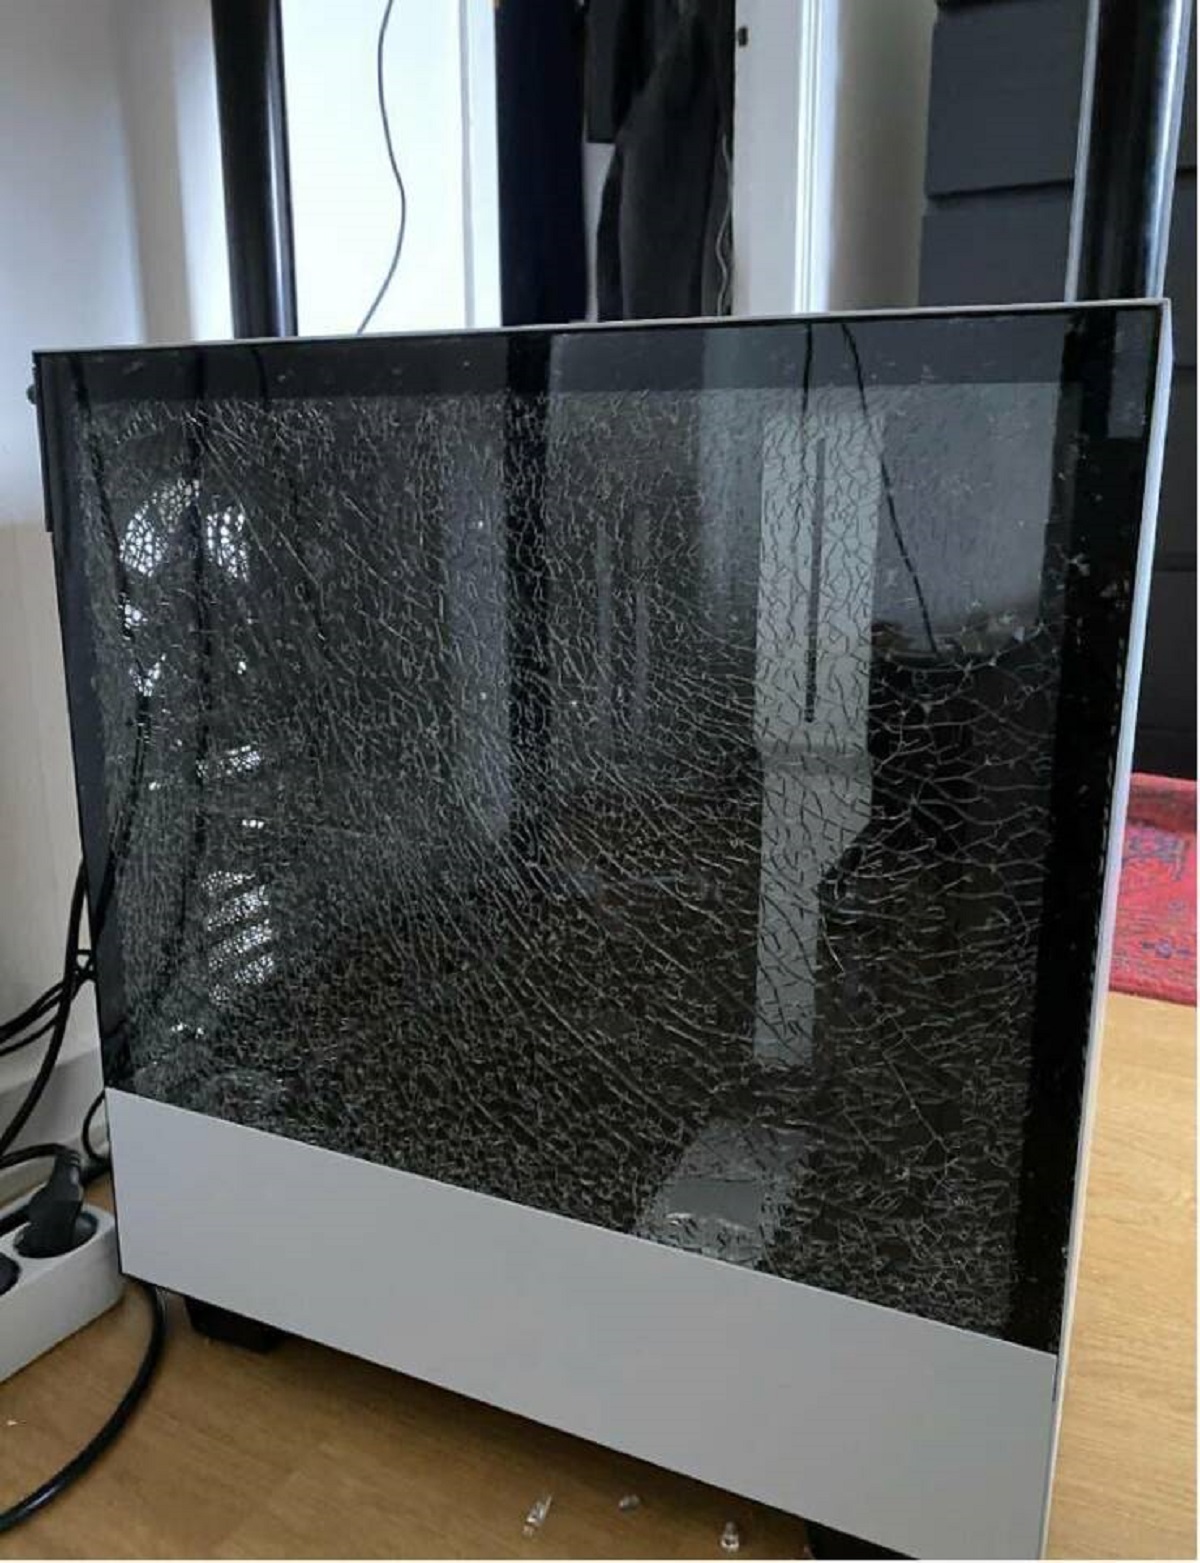 This person's glass PC screen just, like, shattered: